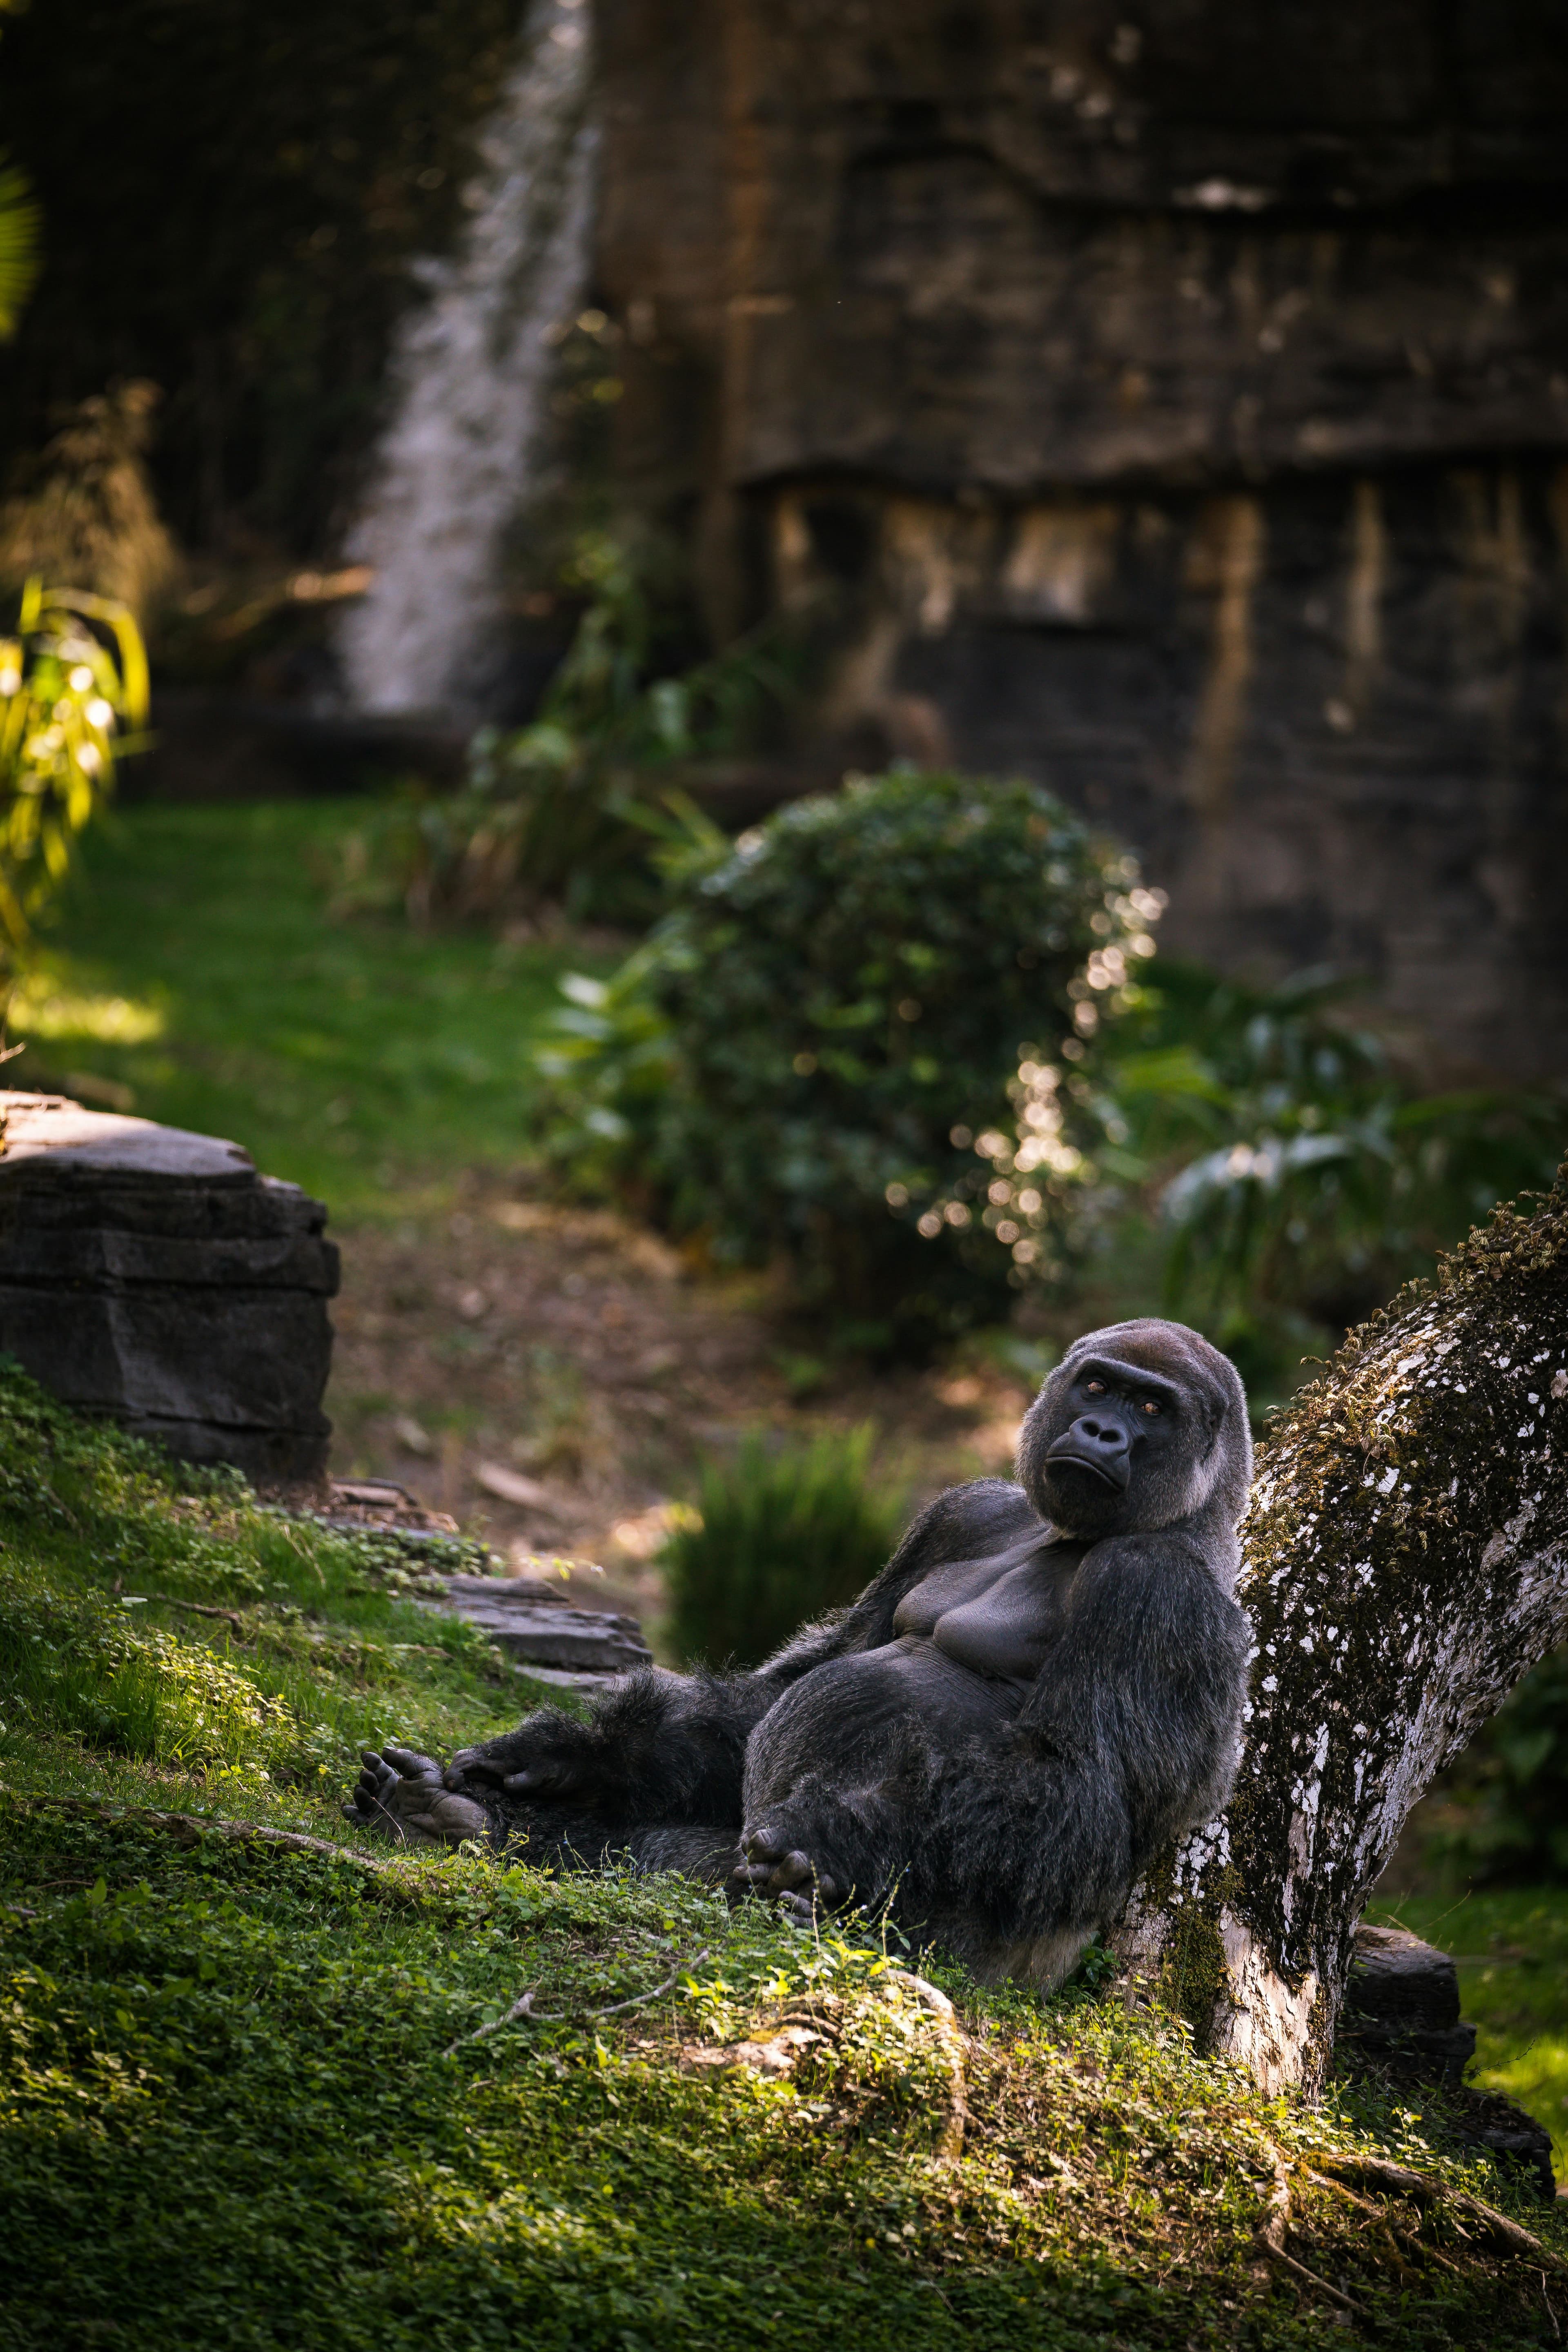 A gorilla leans relaxed against a tree trunk in its enclosure with a lush, green and rocky landscape in the background.